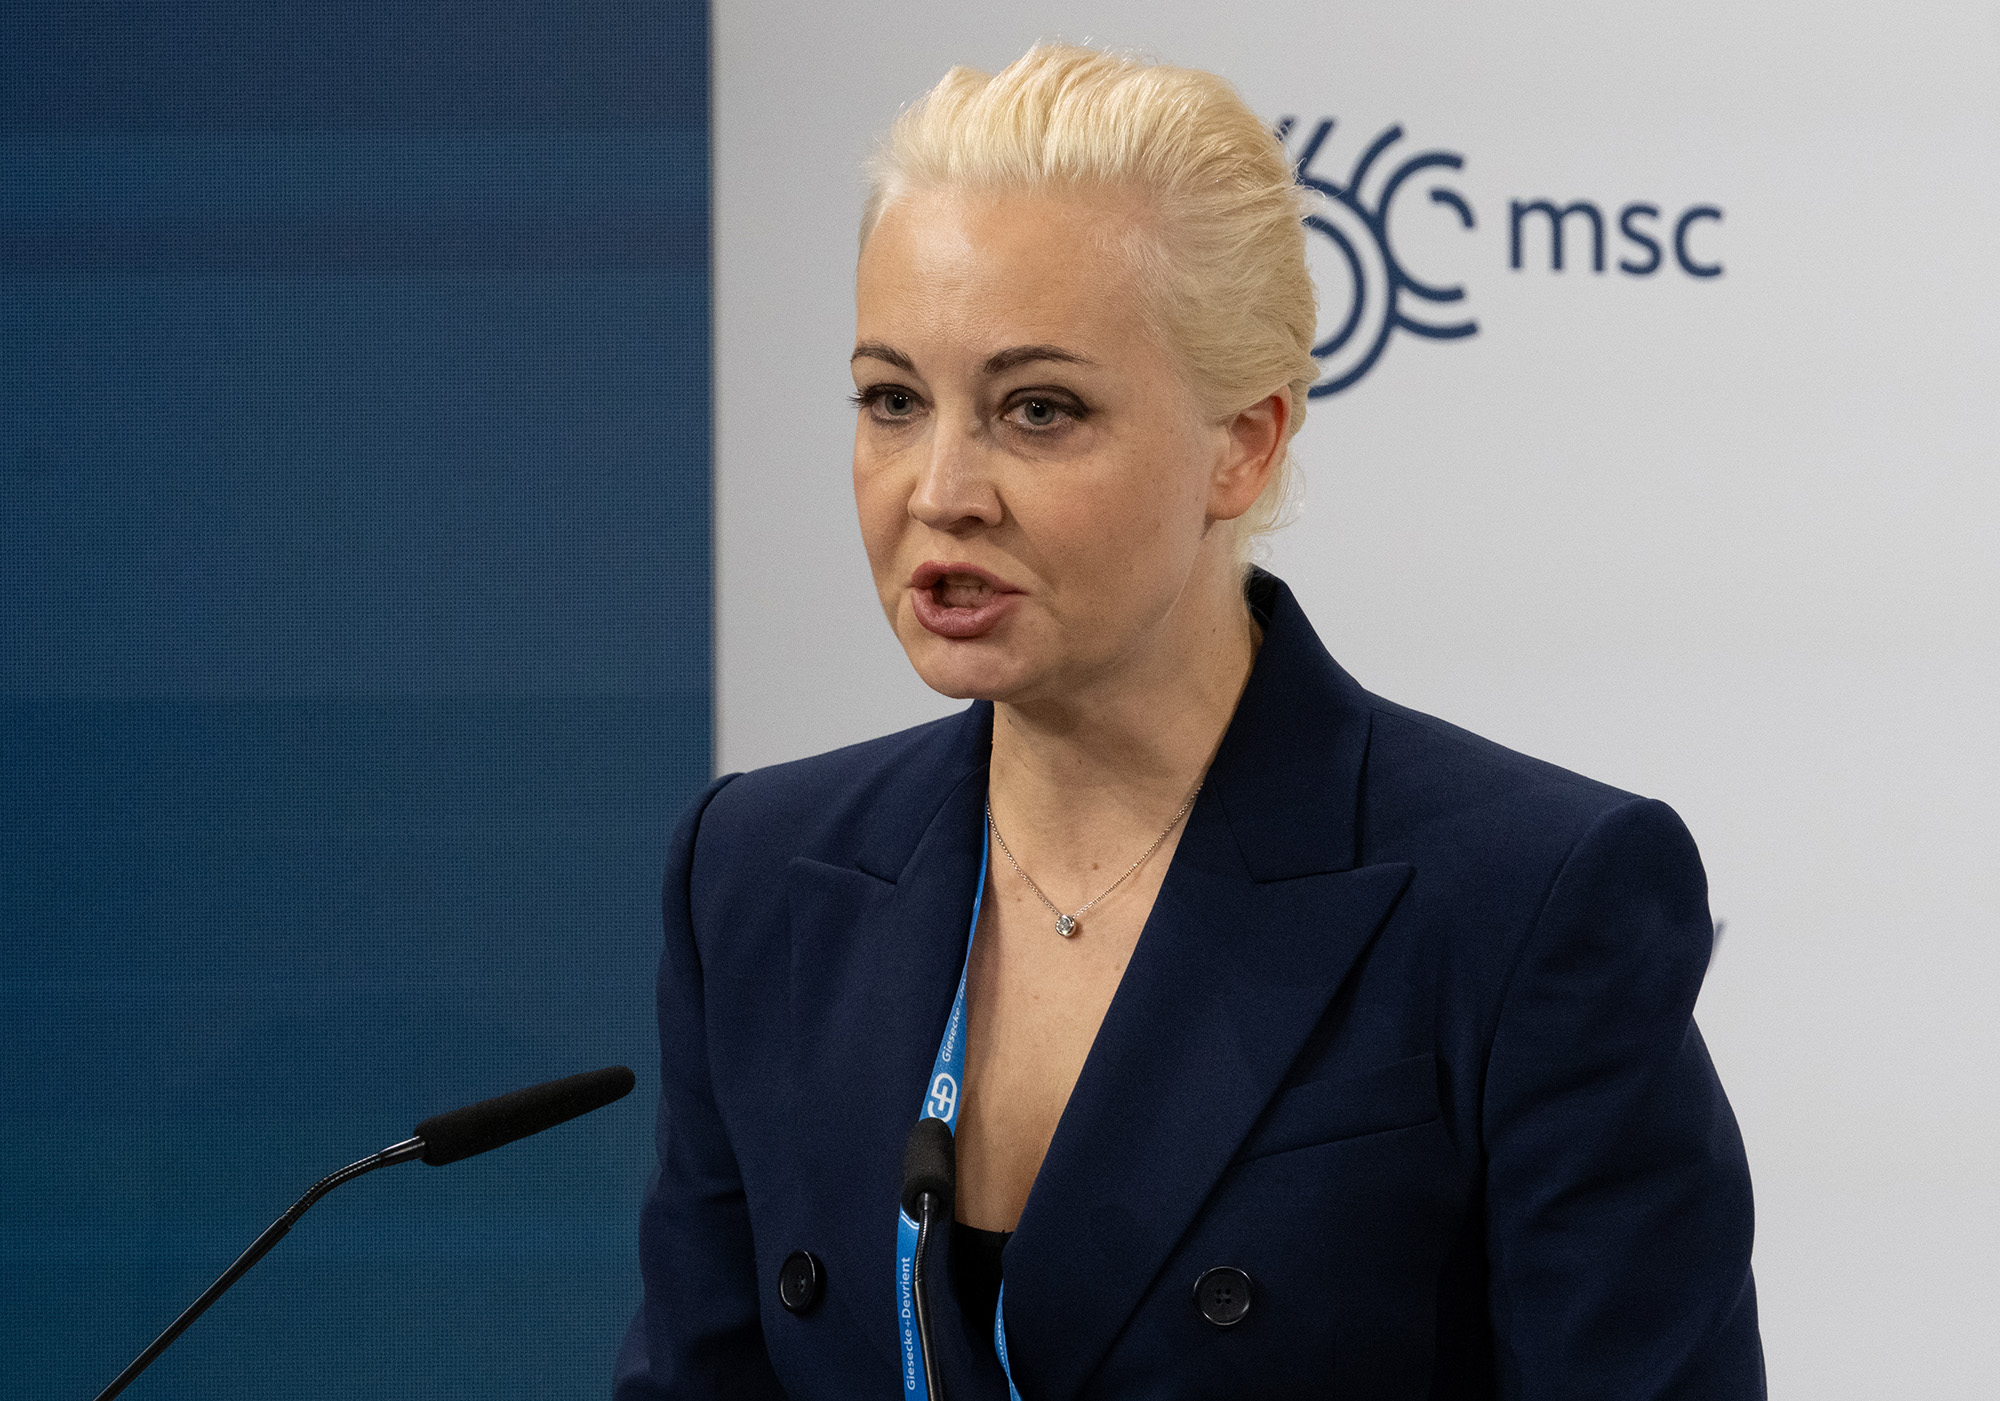 Yulia Navalnaya, wife of Alexey Navalny, delivers a speech at the security conference in Munich, Germany, on February 16.